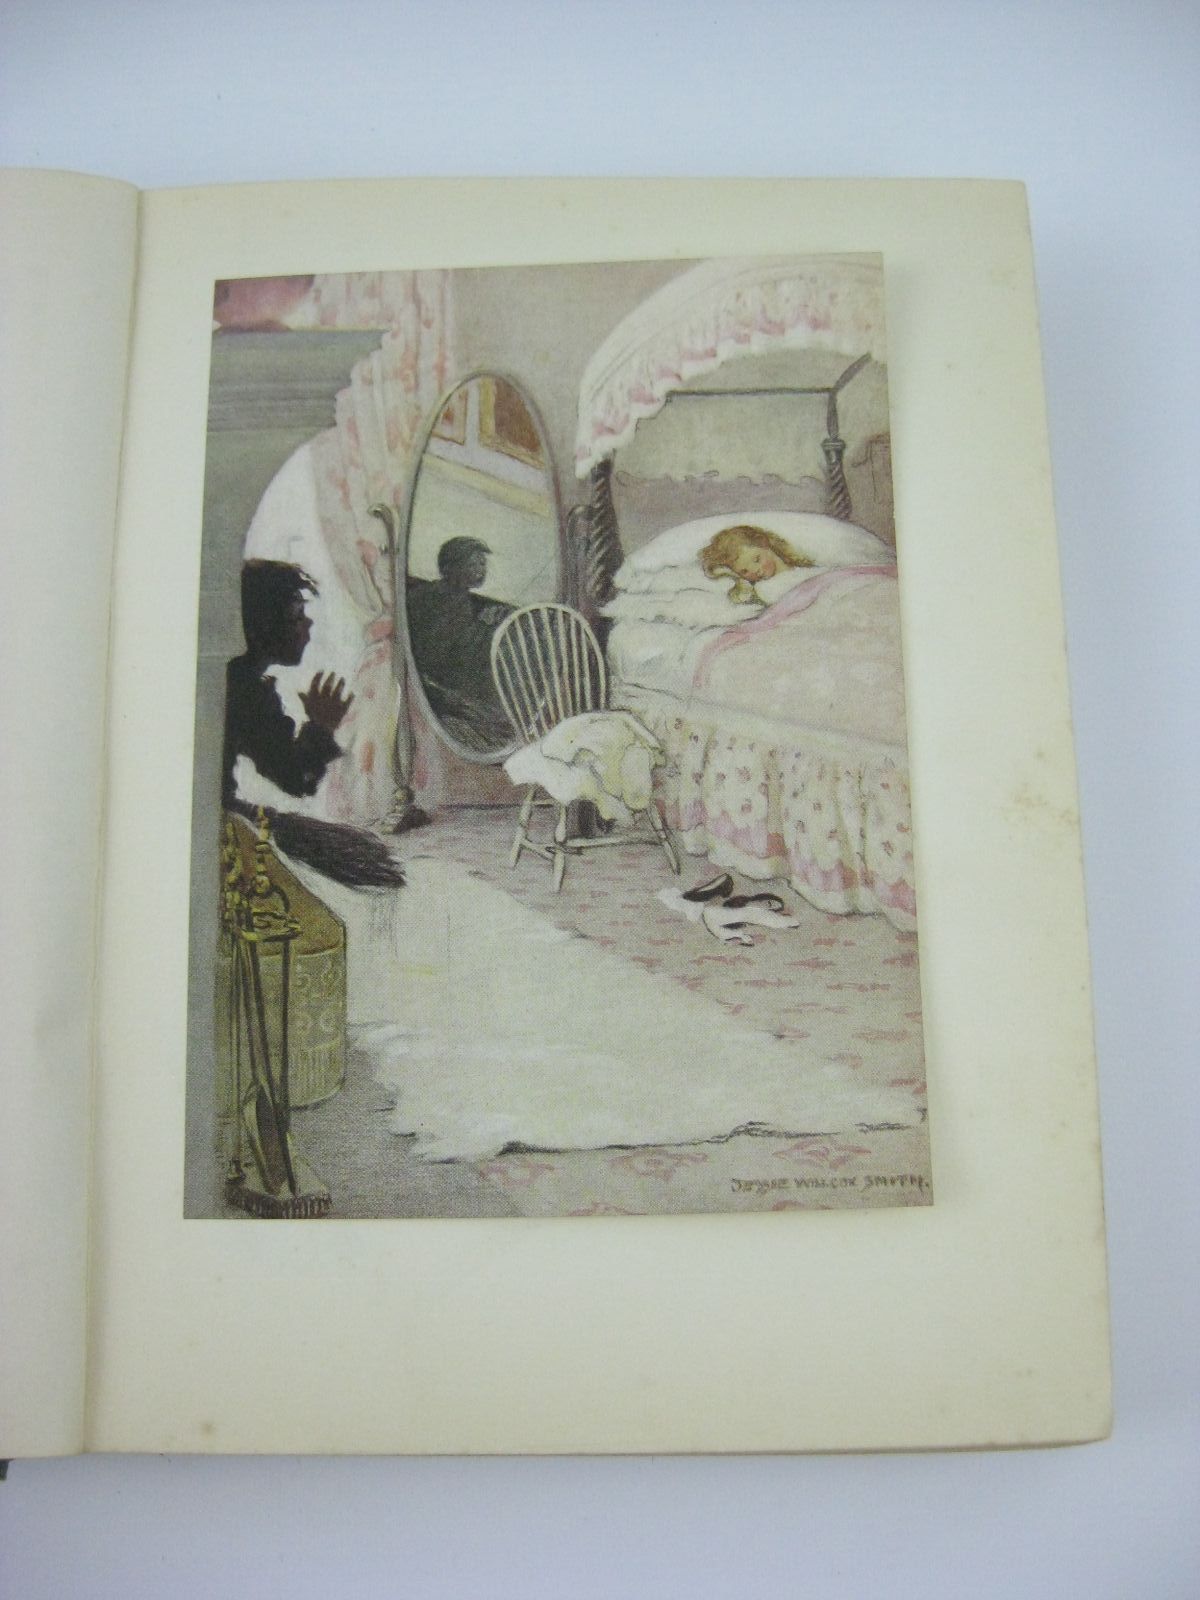 Photo of THE WATER BABIES written by Kingsley, Charles illustrated by Smith, Jessie Willcox published by Hodder & Stoughton (STOCK CODE: 1406056)  for sale by Stella & Rose's Books